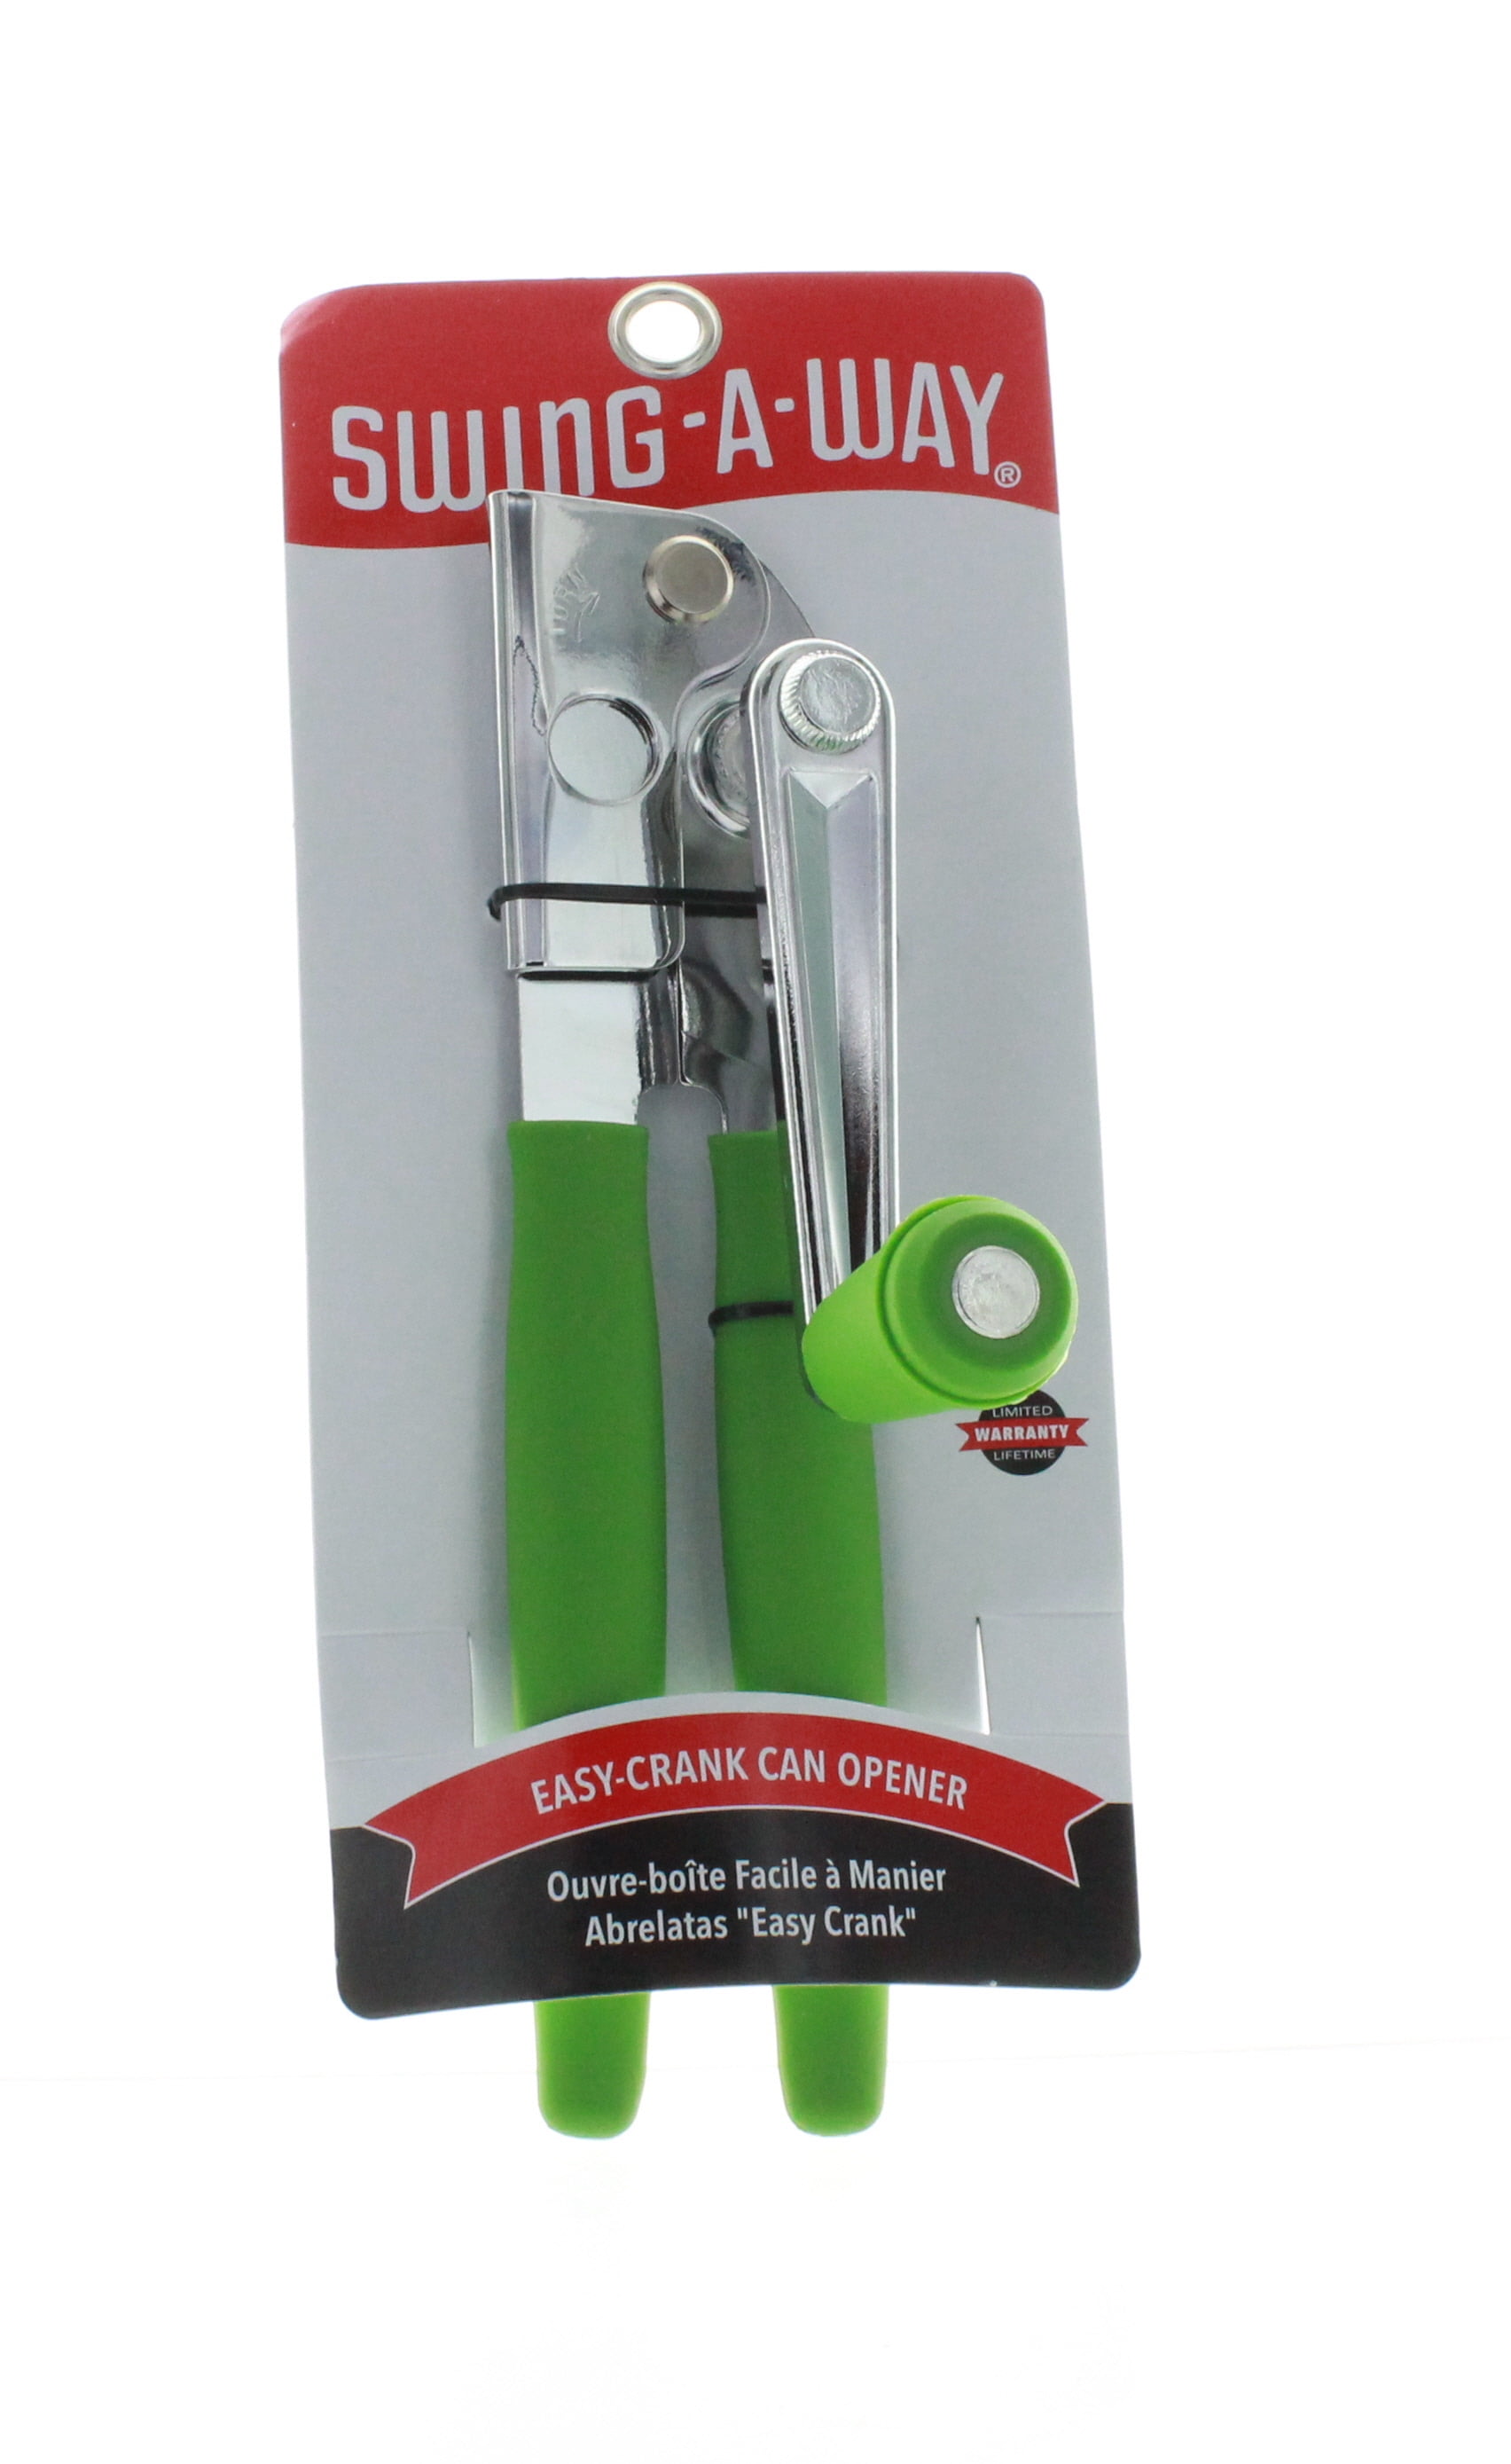 Proctor Silex Durable Can Opener